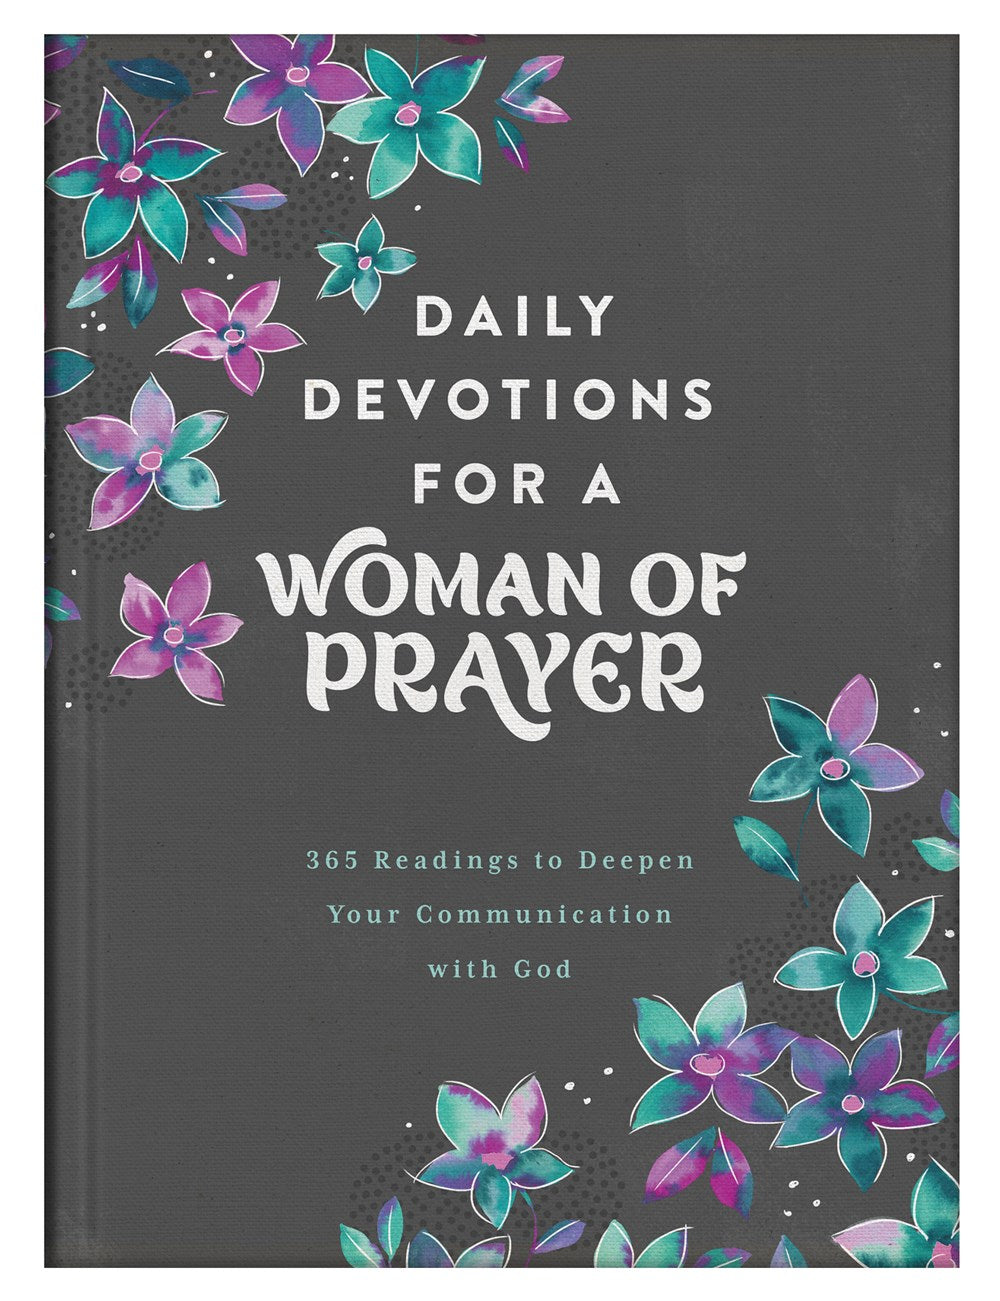 Daily Devotions for a Woman of Prayer - The Christian Gift Company